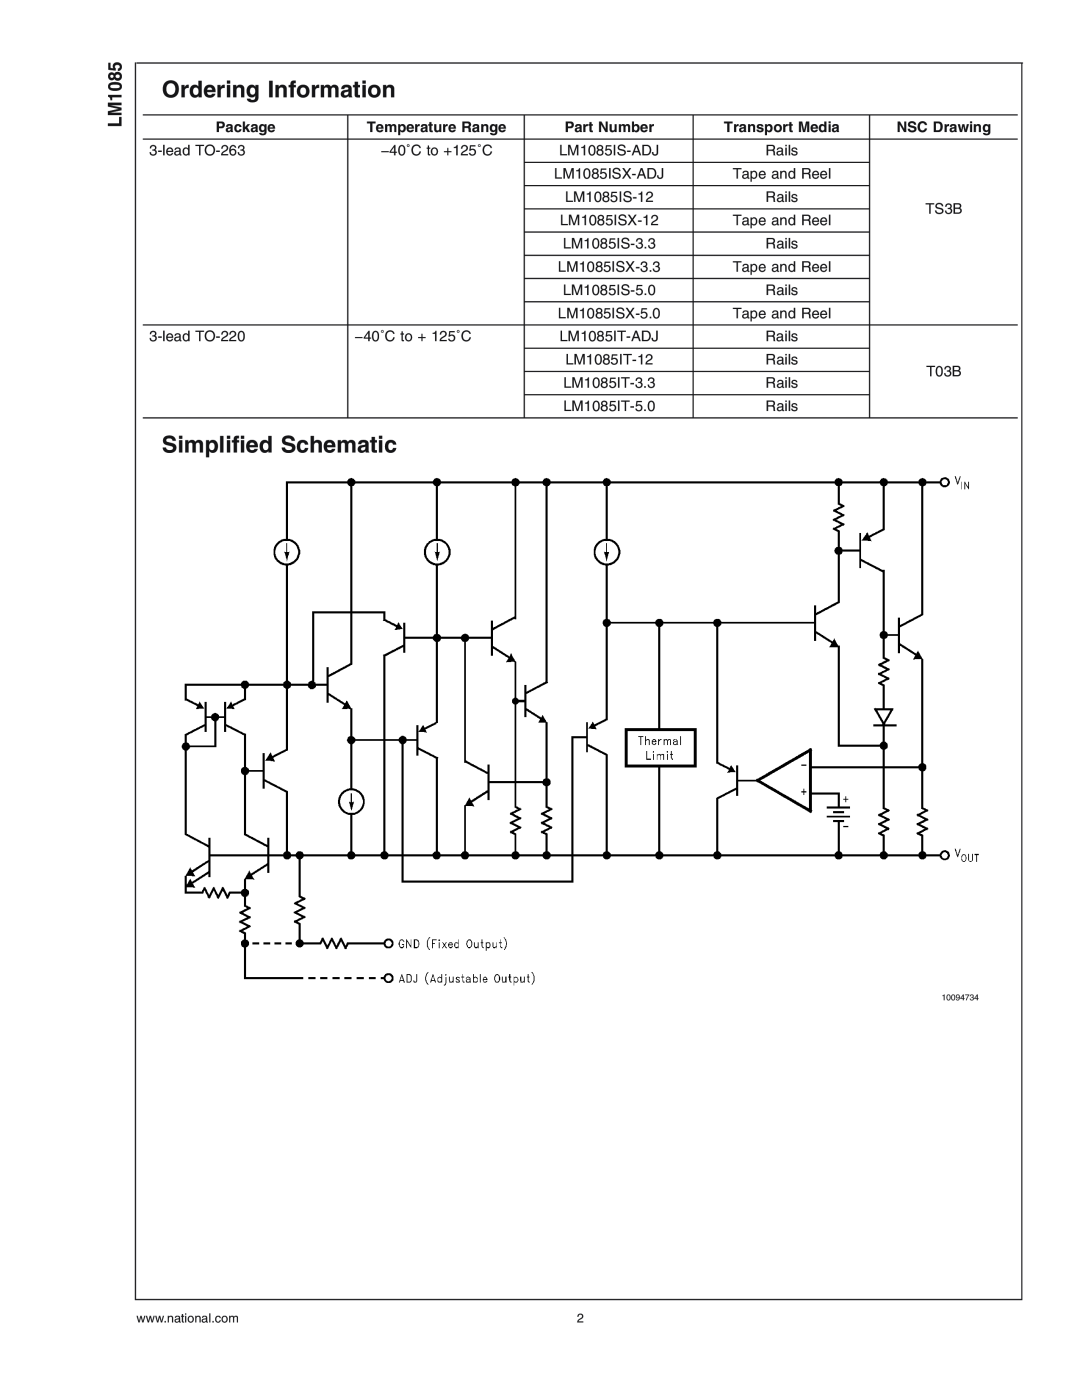 National Instruments LM1085 Series Ordering Information, Simplified Schematic, Package, Temperature Range, Part Number 